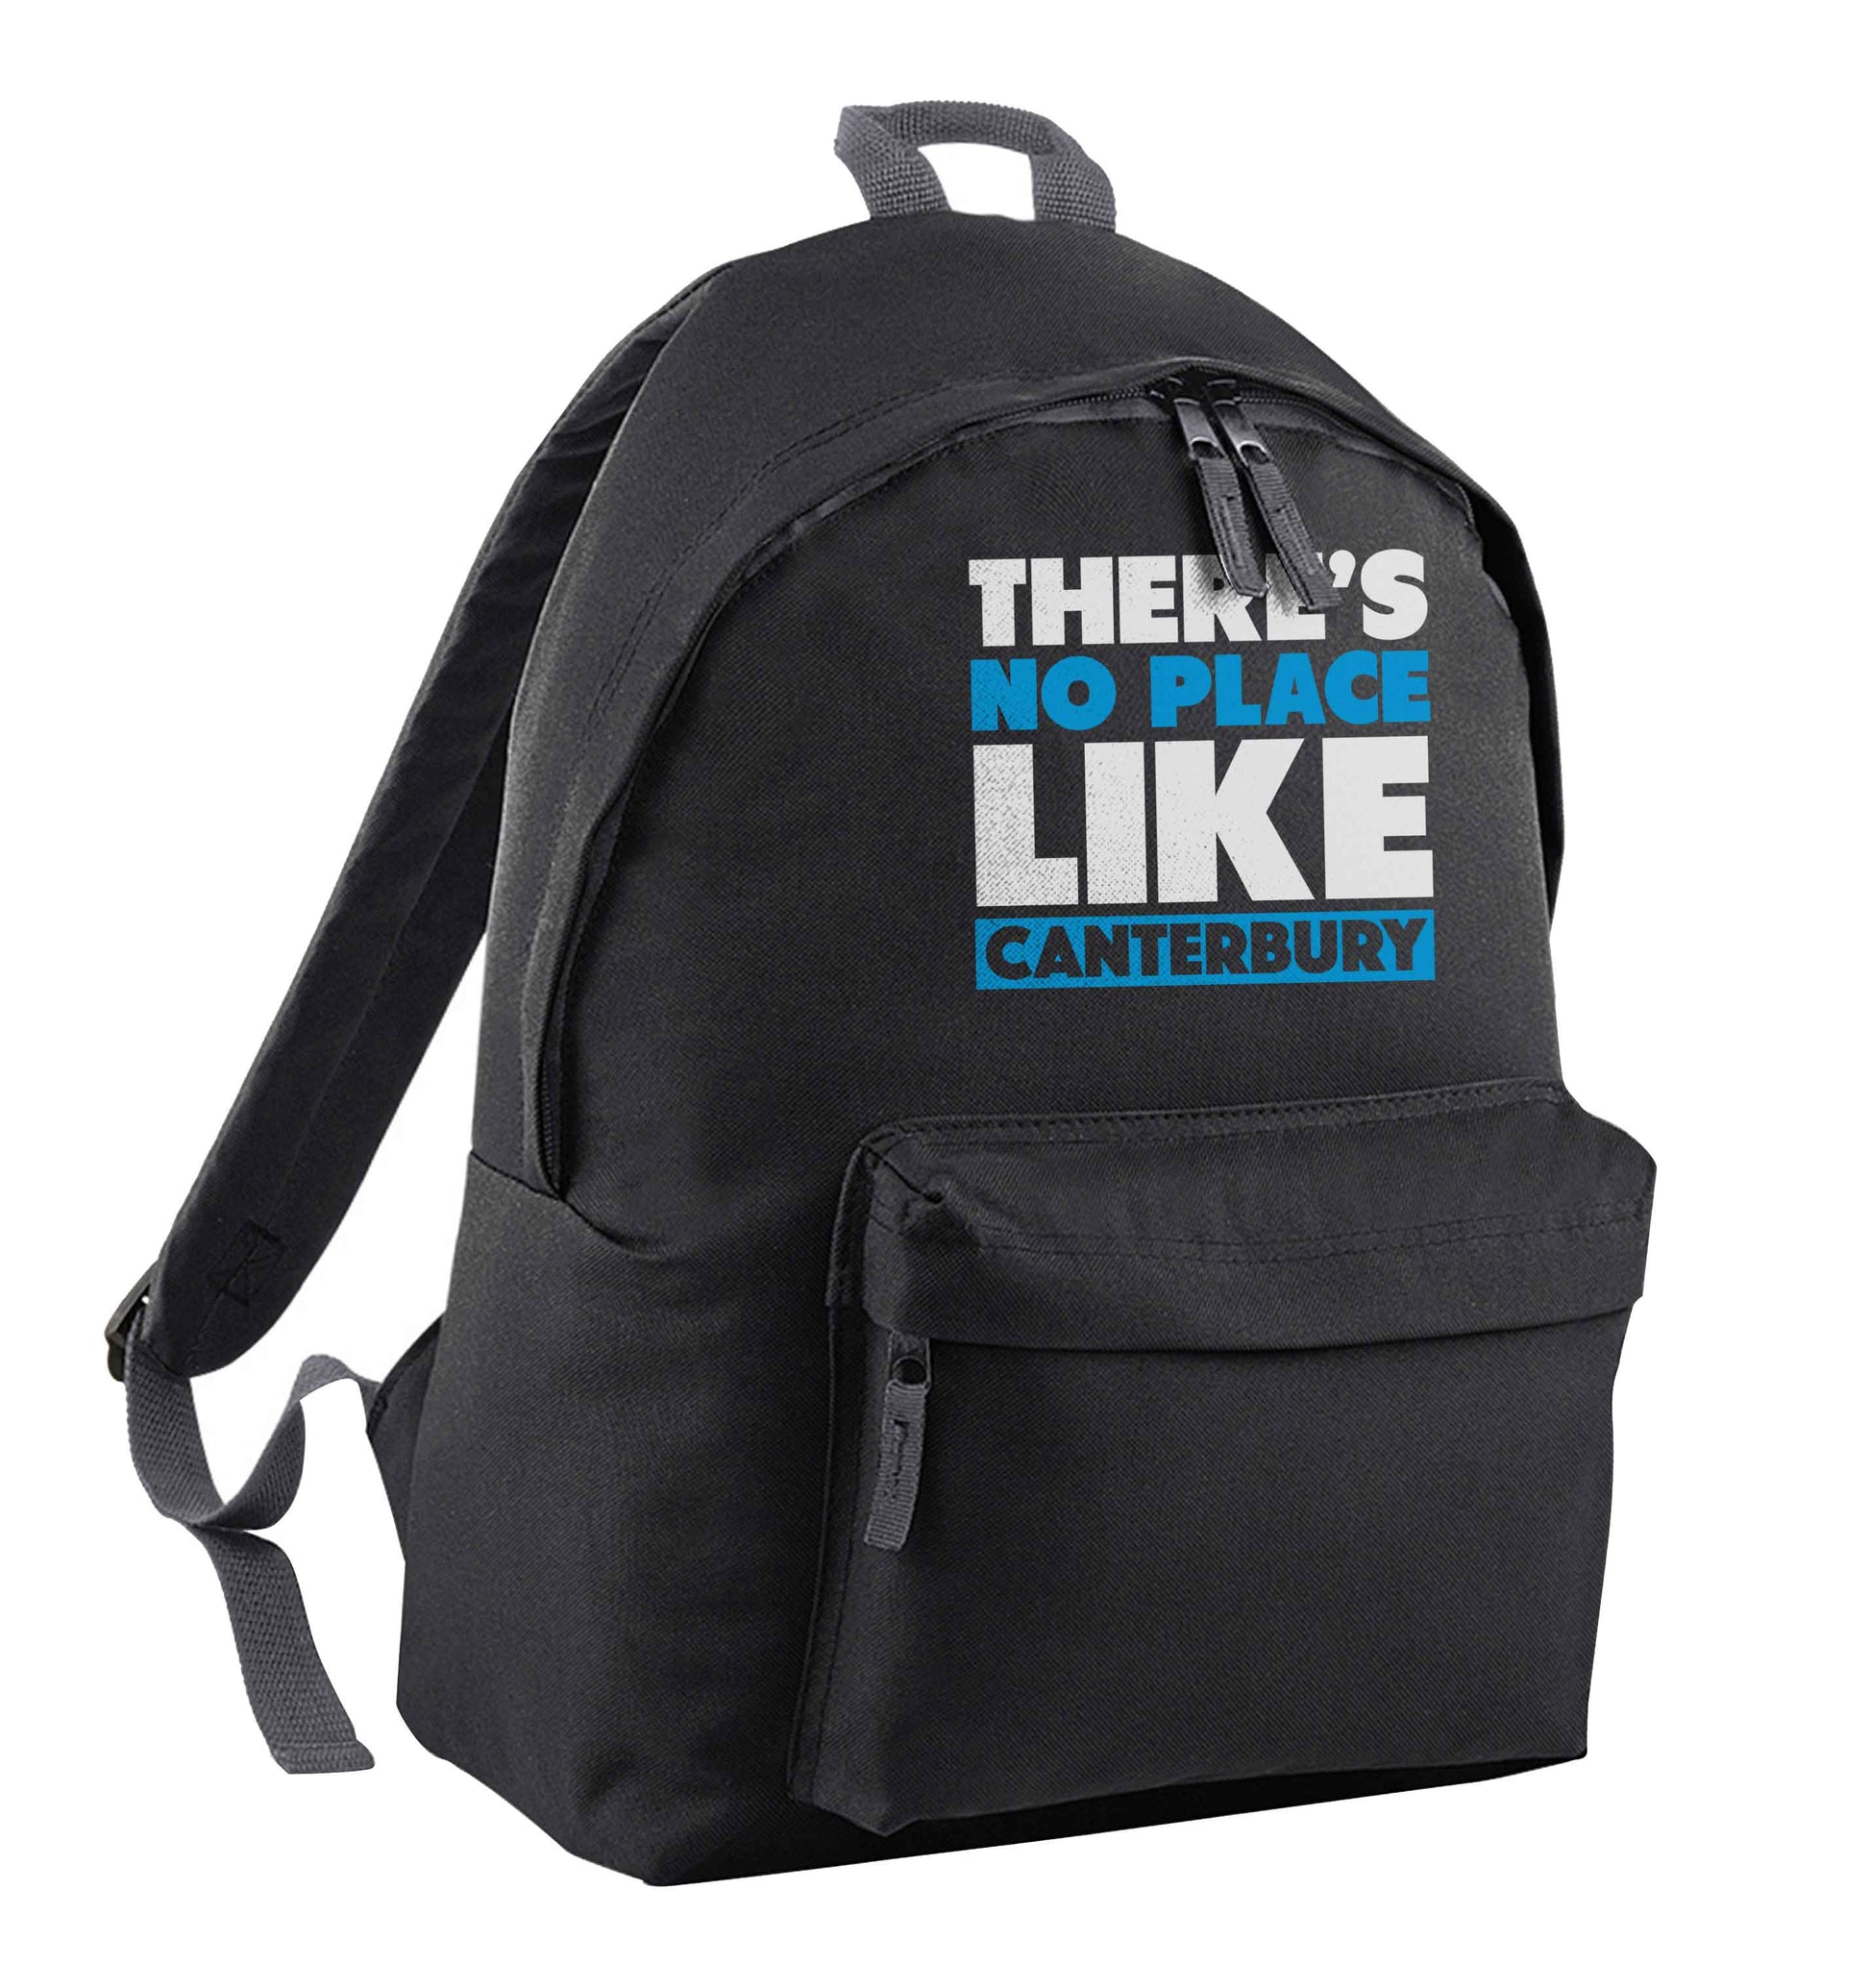 There's no place like Canterbury black adults backpack